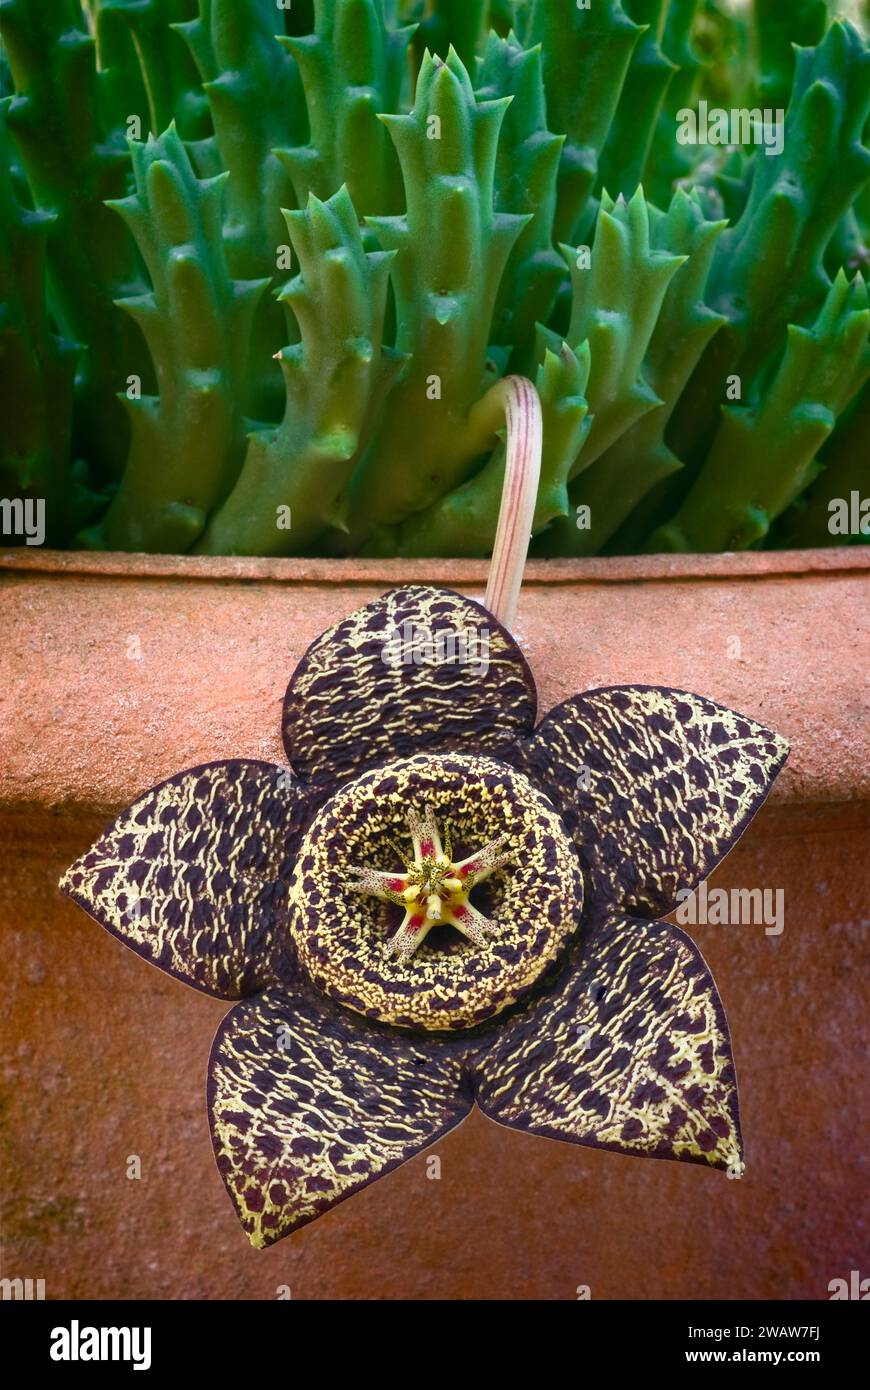 Orbea variegata, Apocynaceae. Ornamental succulent plant. rare herb of desert, yellow-red flower. Stock Photo